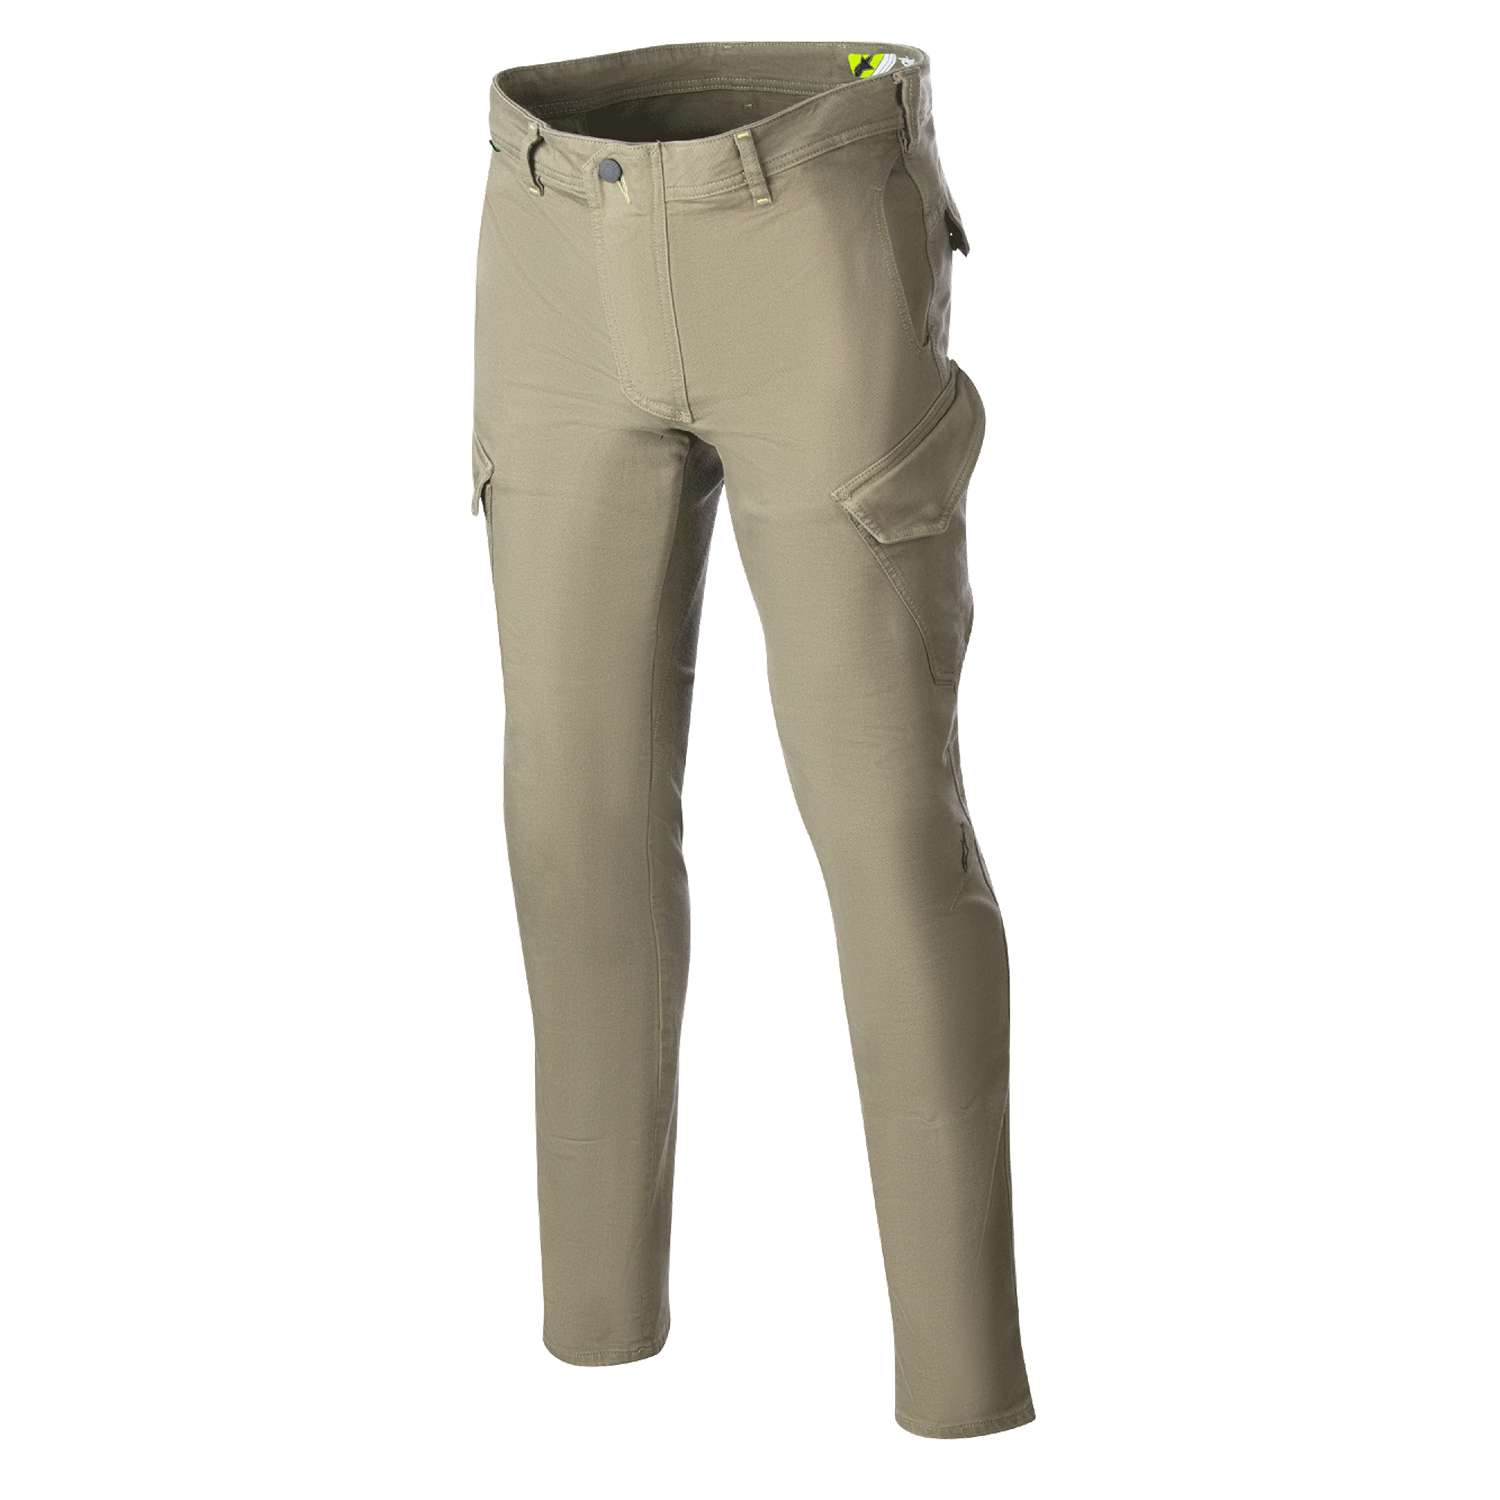 Image of Alpinestars Caliber Slim Fit Tech Riding Pants Military Green Taille 28